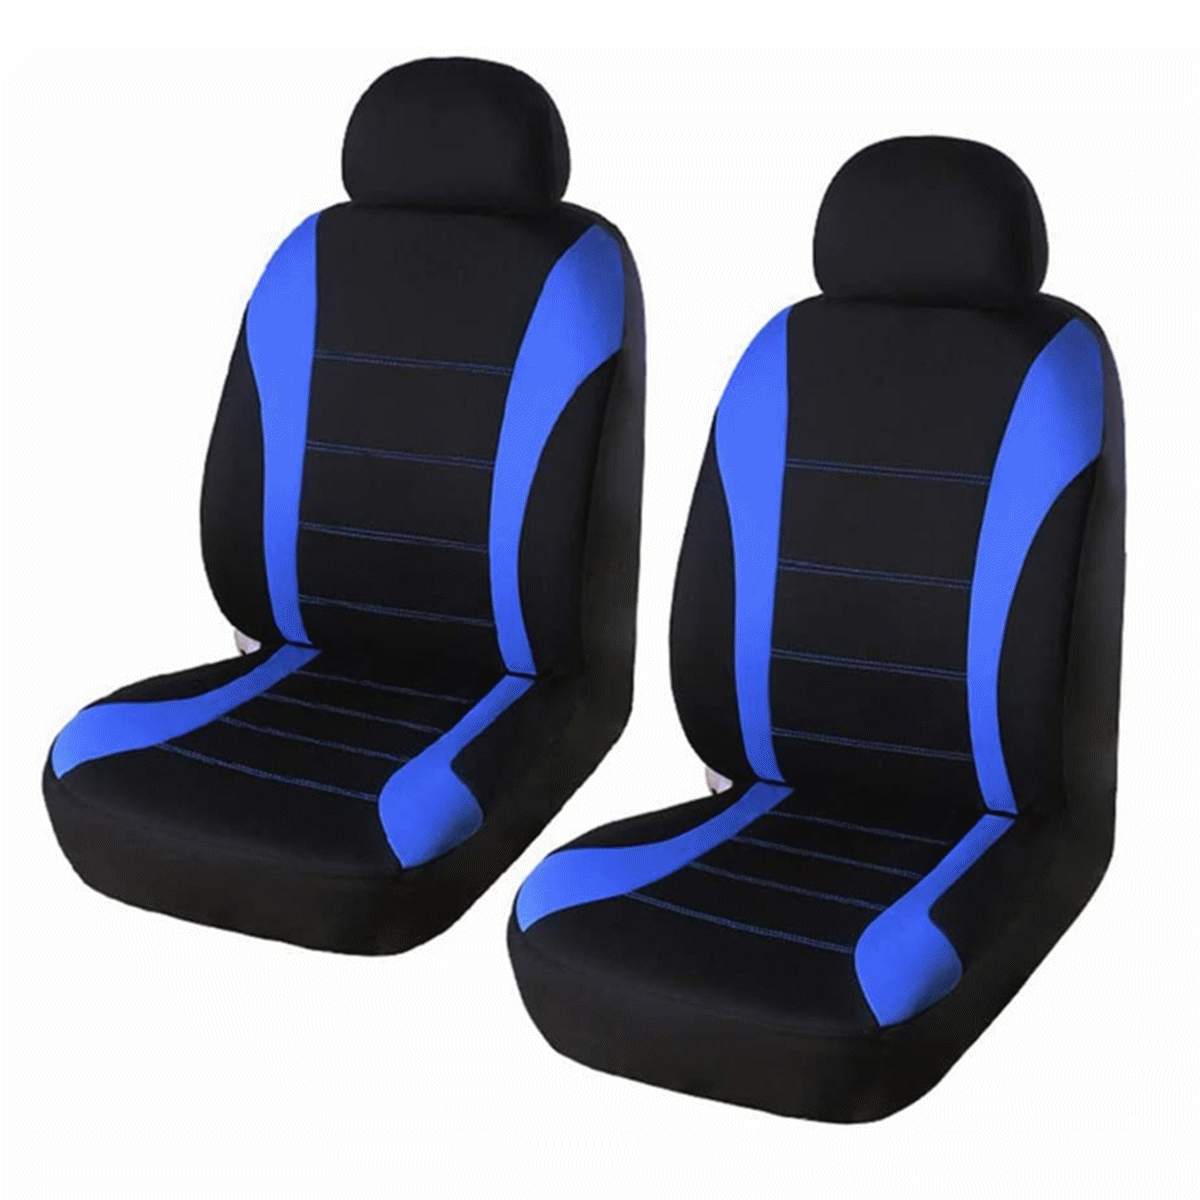 Red KKmoon 9pcs Universal Car Seat Covers for Front and Rear Breathable Seat Cover Car Seat Covers